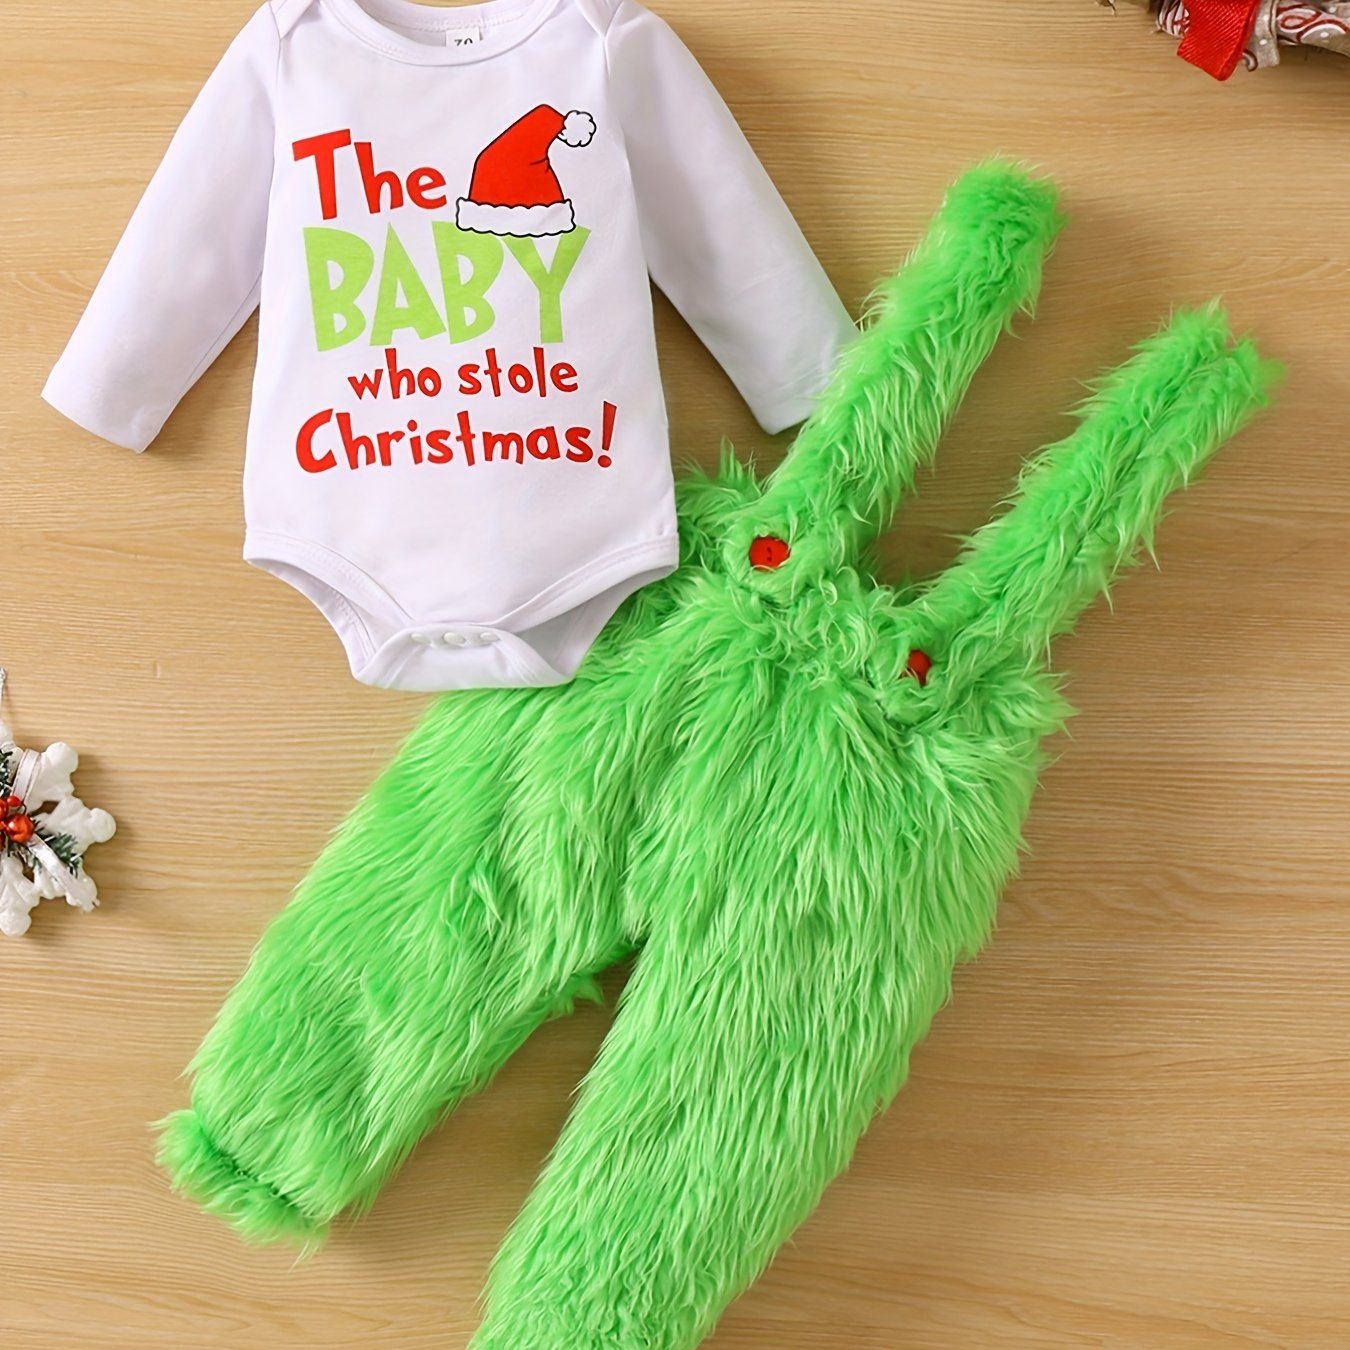 Adorable Baby Christmas Outfit - Funny Graphic Crew Neck Long Sleeve Romper + Green Fuzzy Suspender Pants Clothes Set